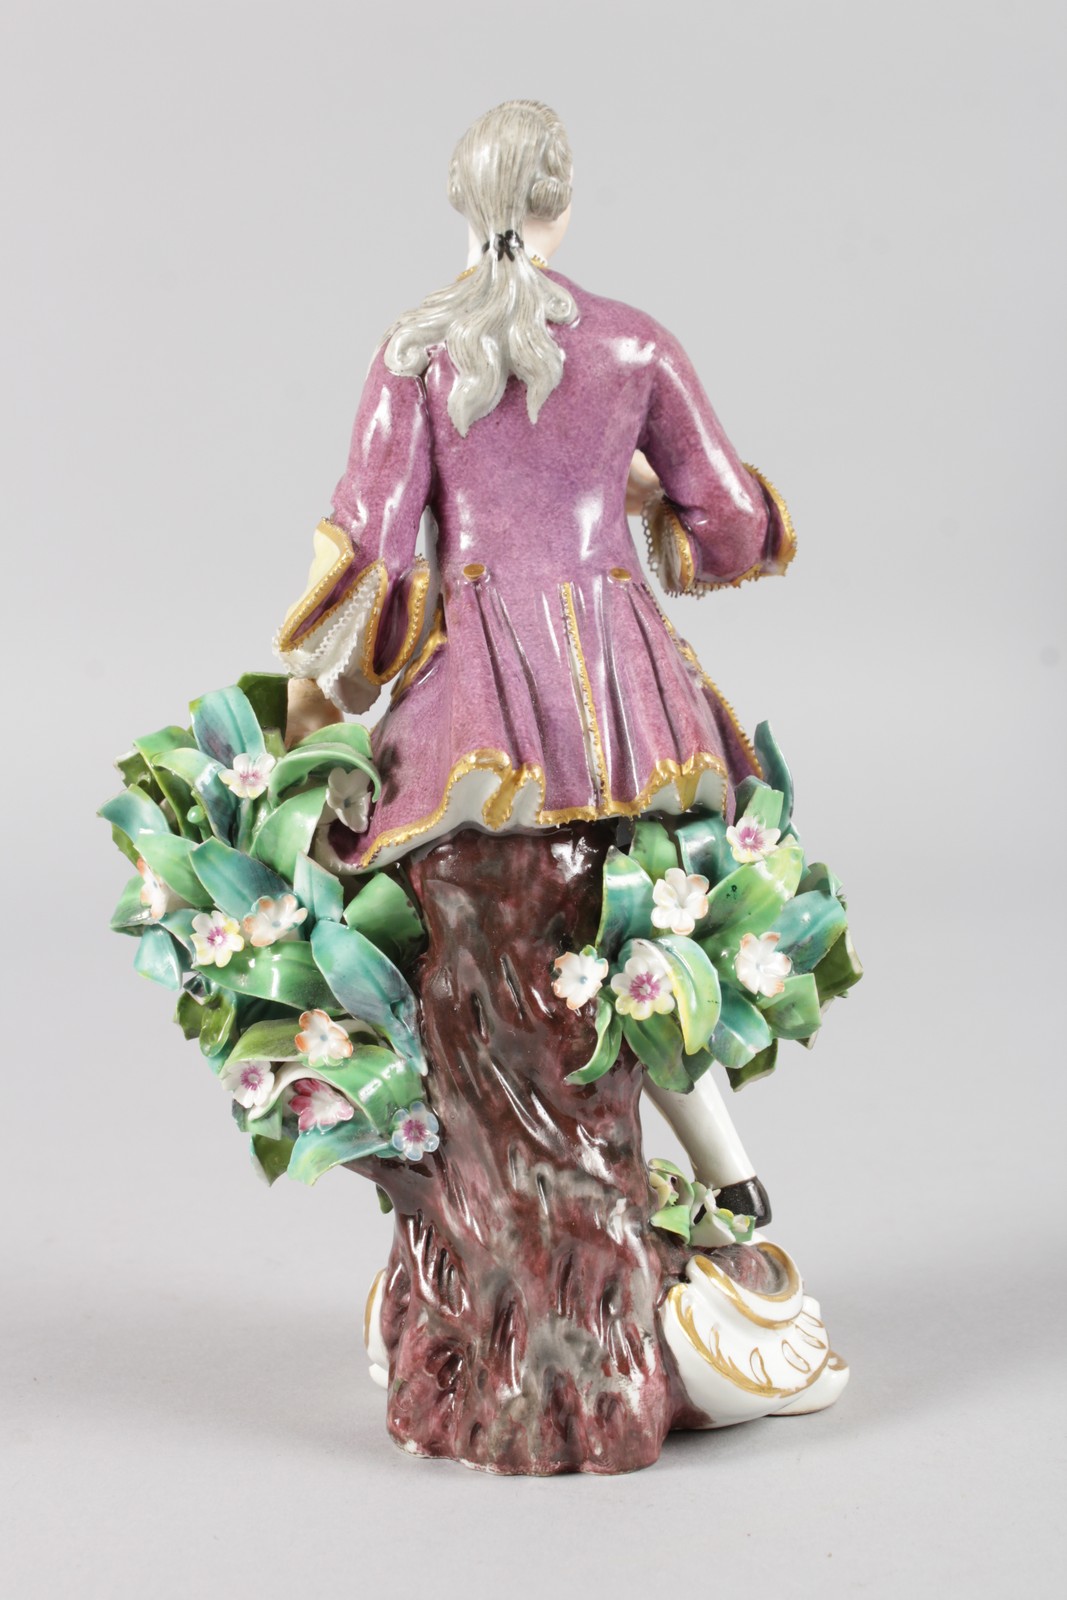 AN EARLY 19TH CENTURY FINE DERBY FIGURE OF A GALLANT standing beside a flowering plant in formal - Image 3 of 5